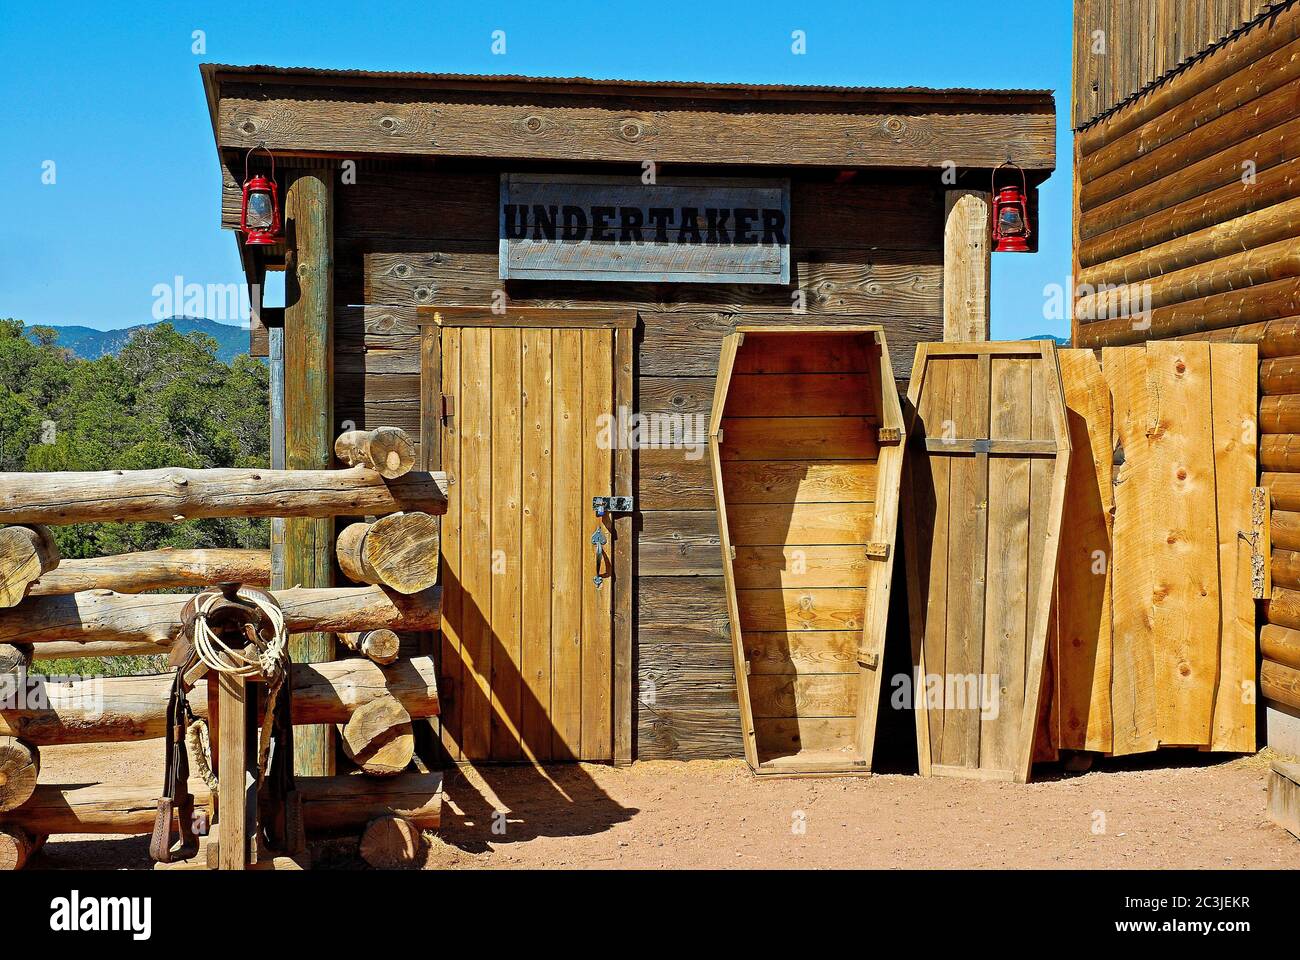 Open wooden coffin in front of a carpenter's studio with an Undertaker sign Stock Photo